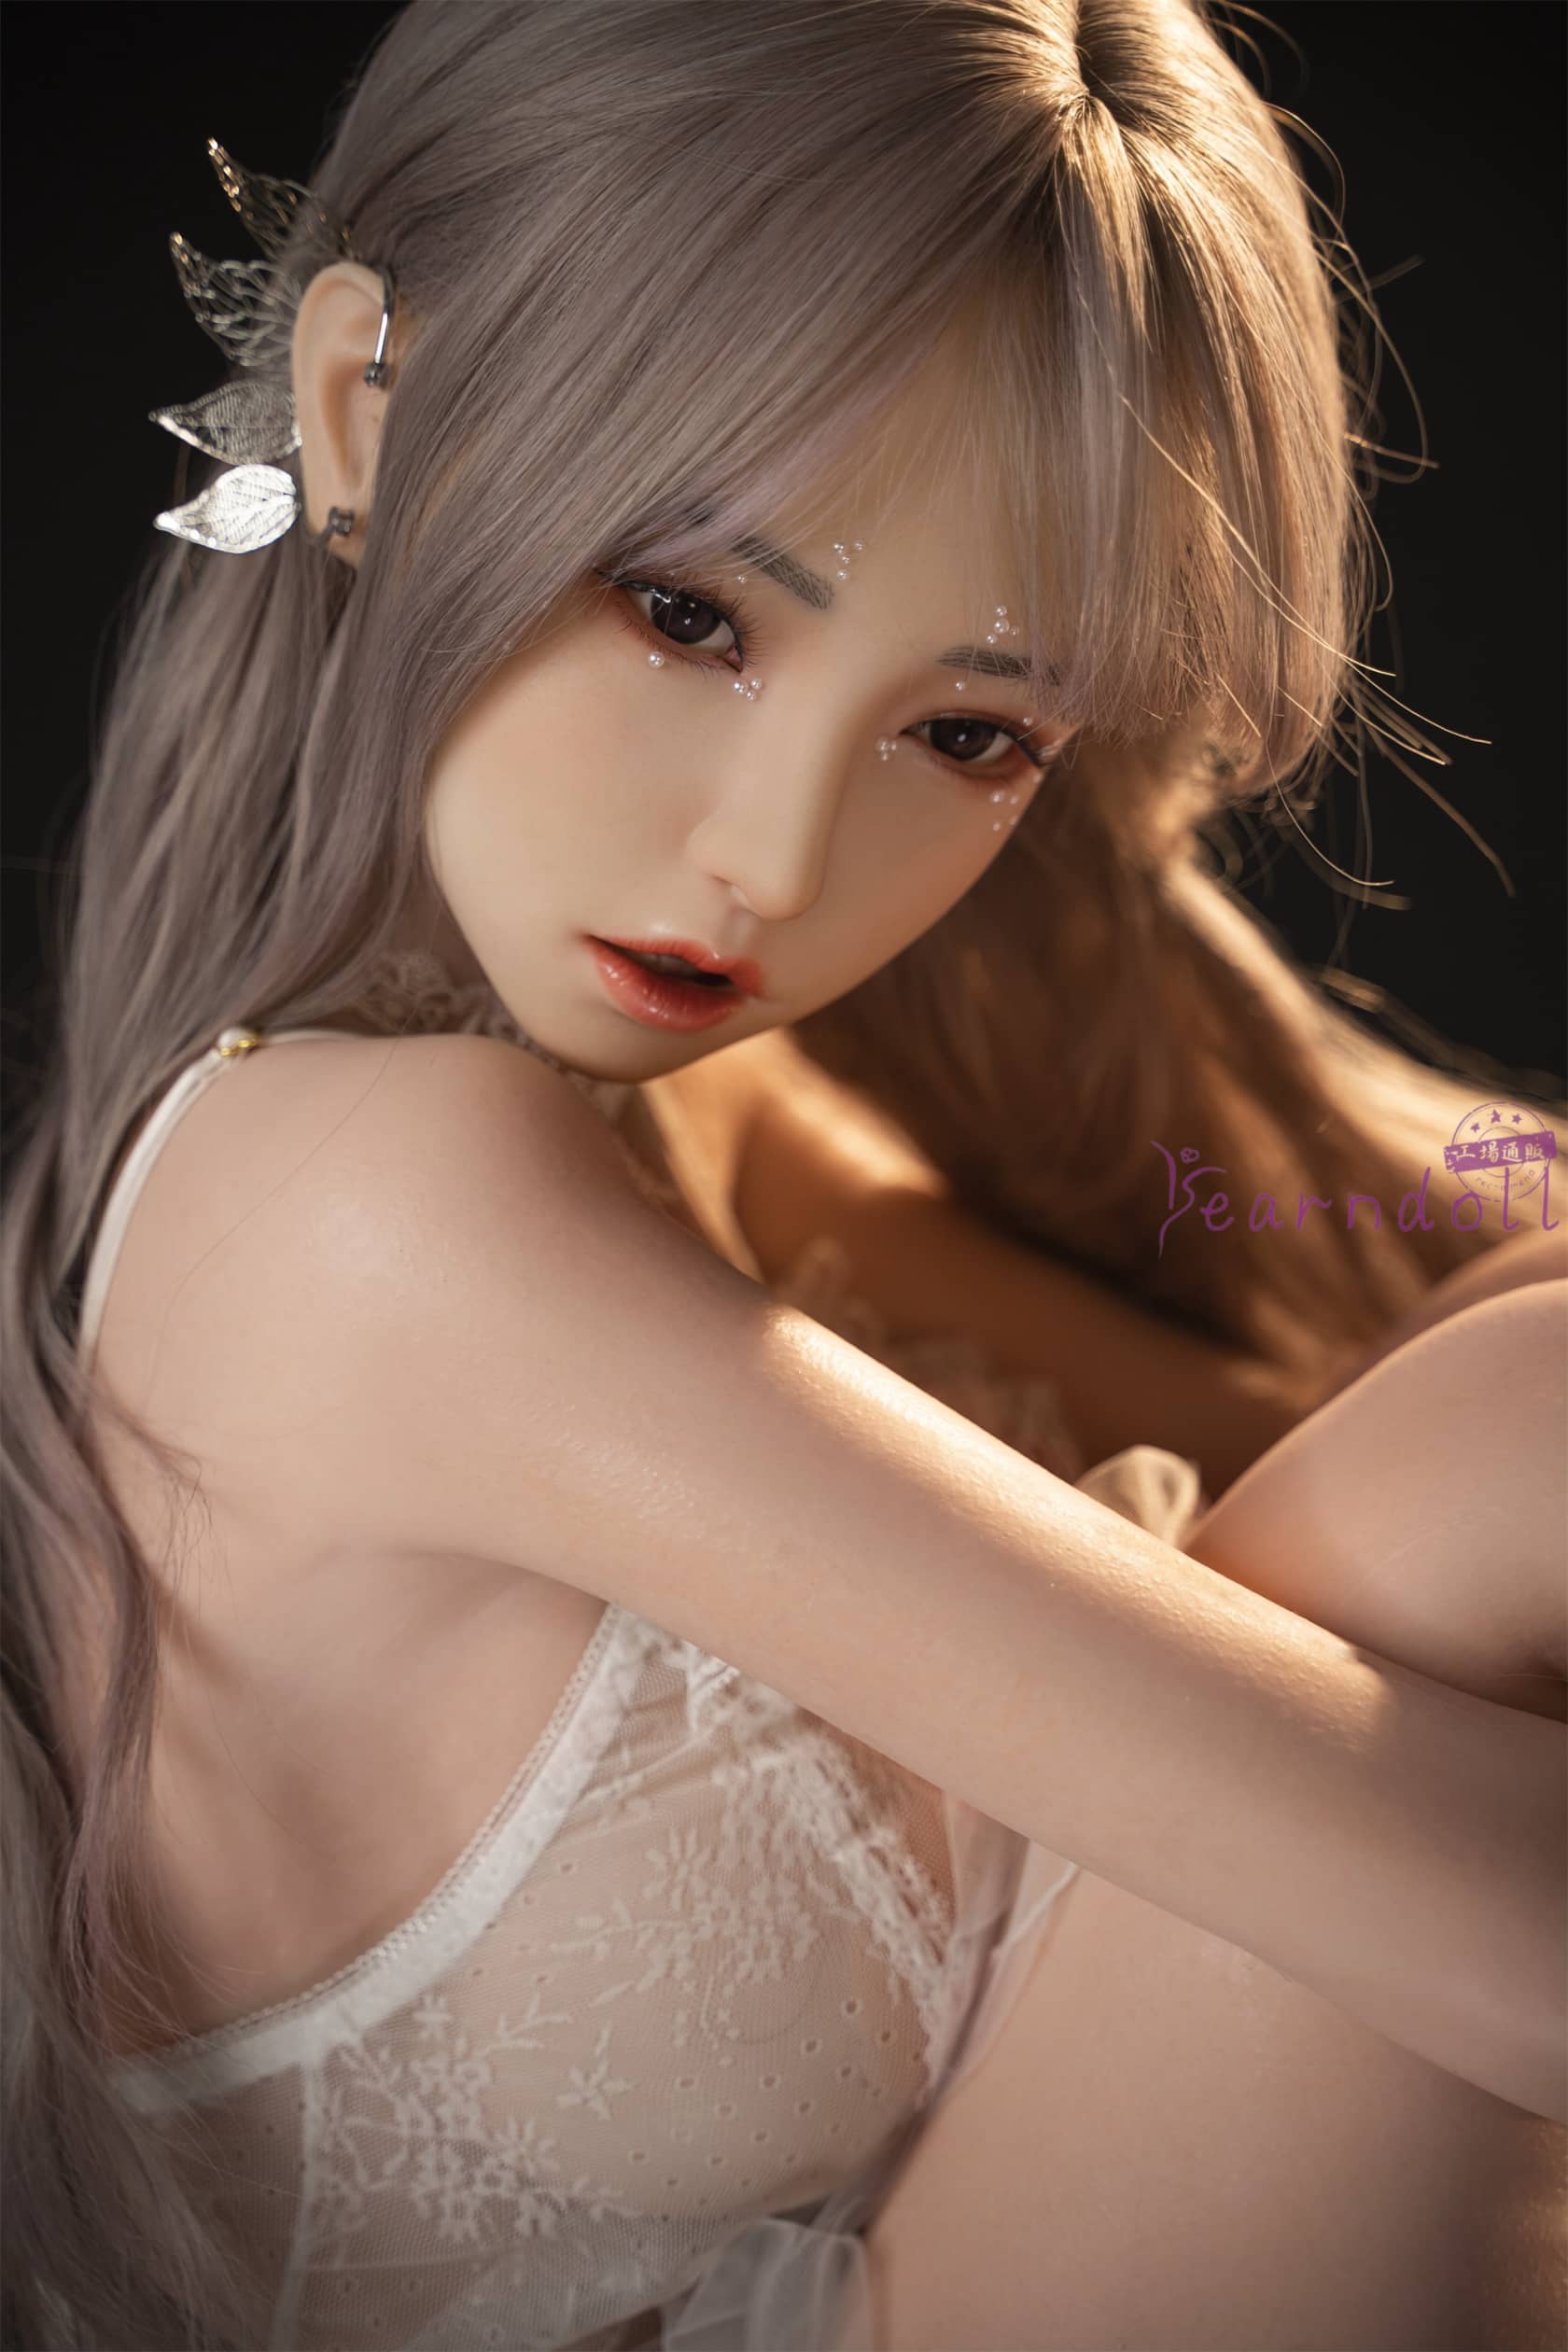 Yearndoll 158cm (5ft2) Sakura H-Cup Y201 Full Silicone